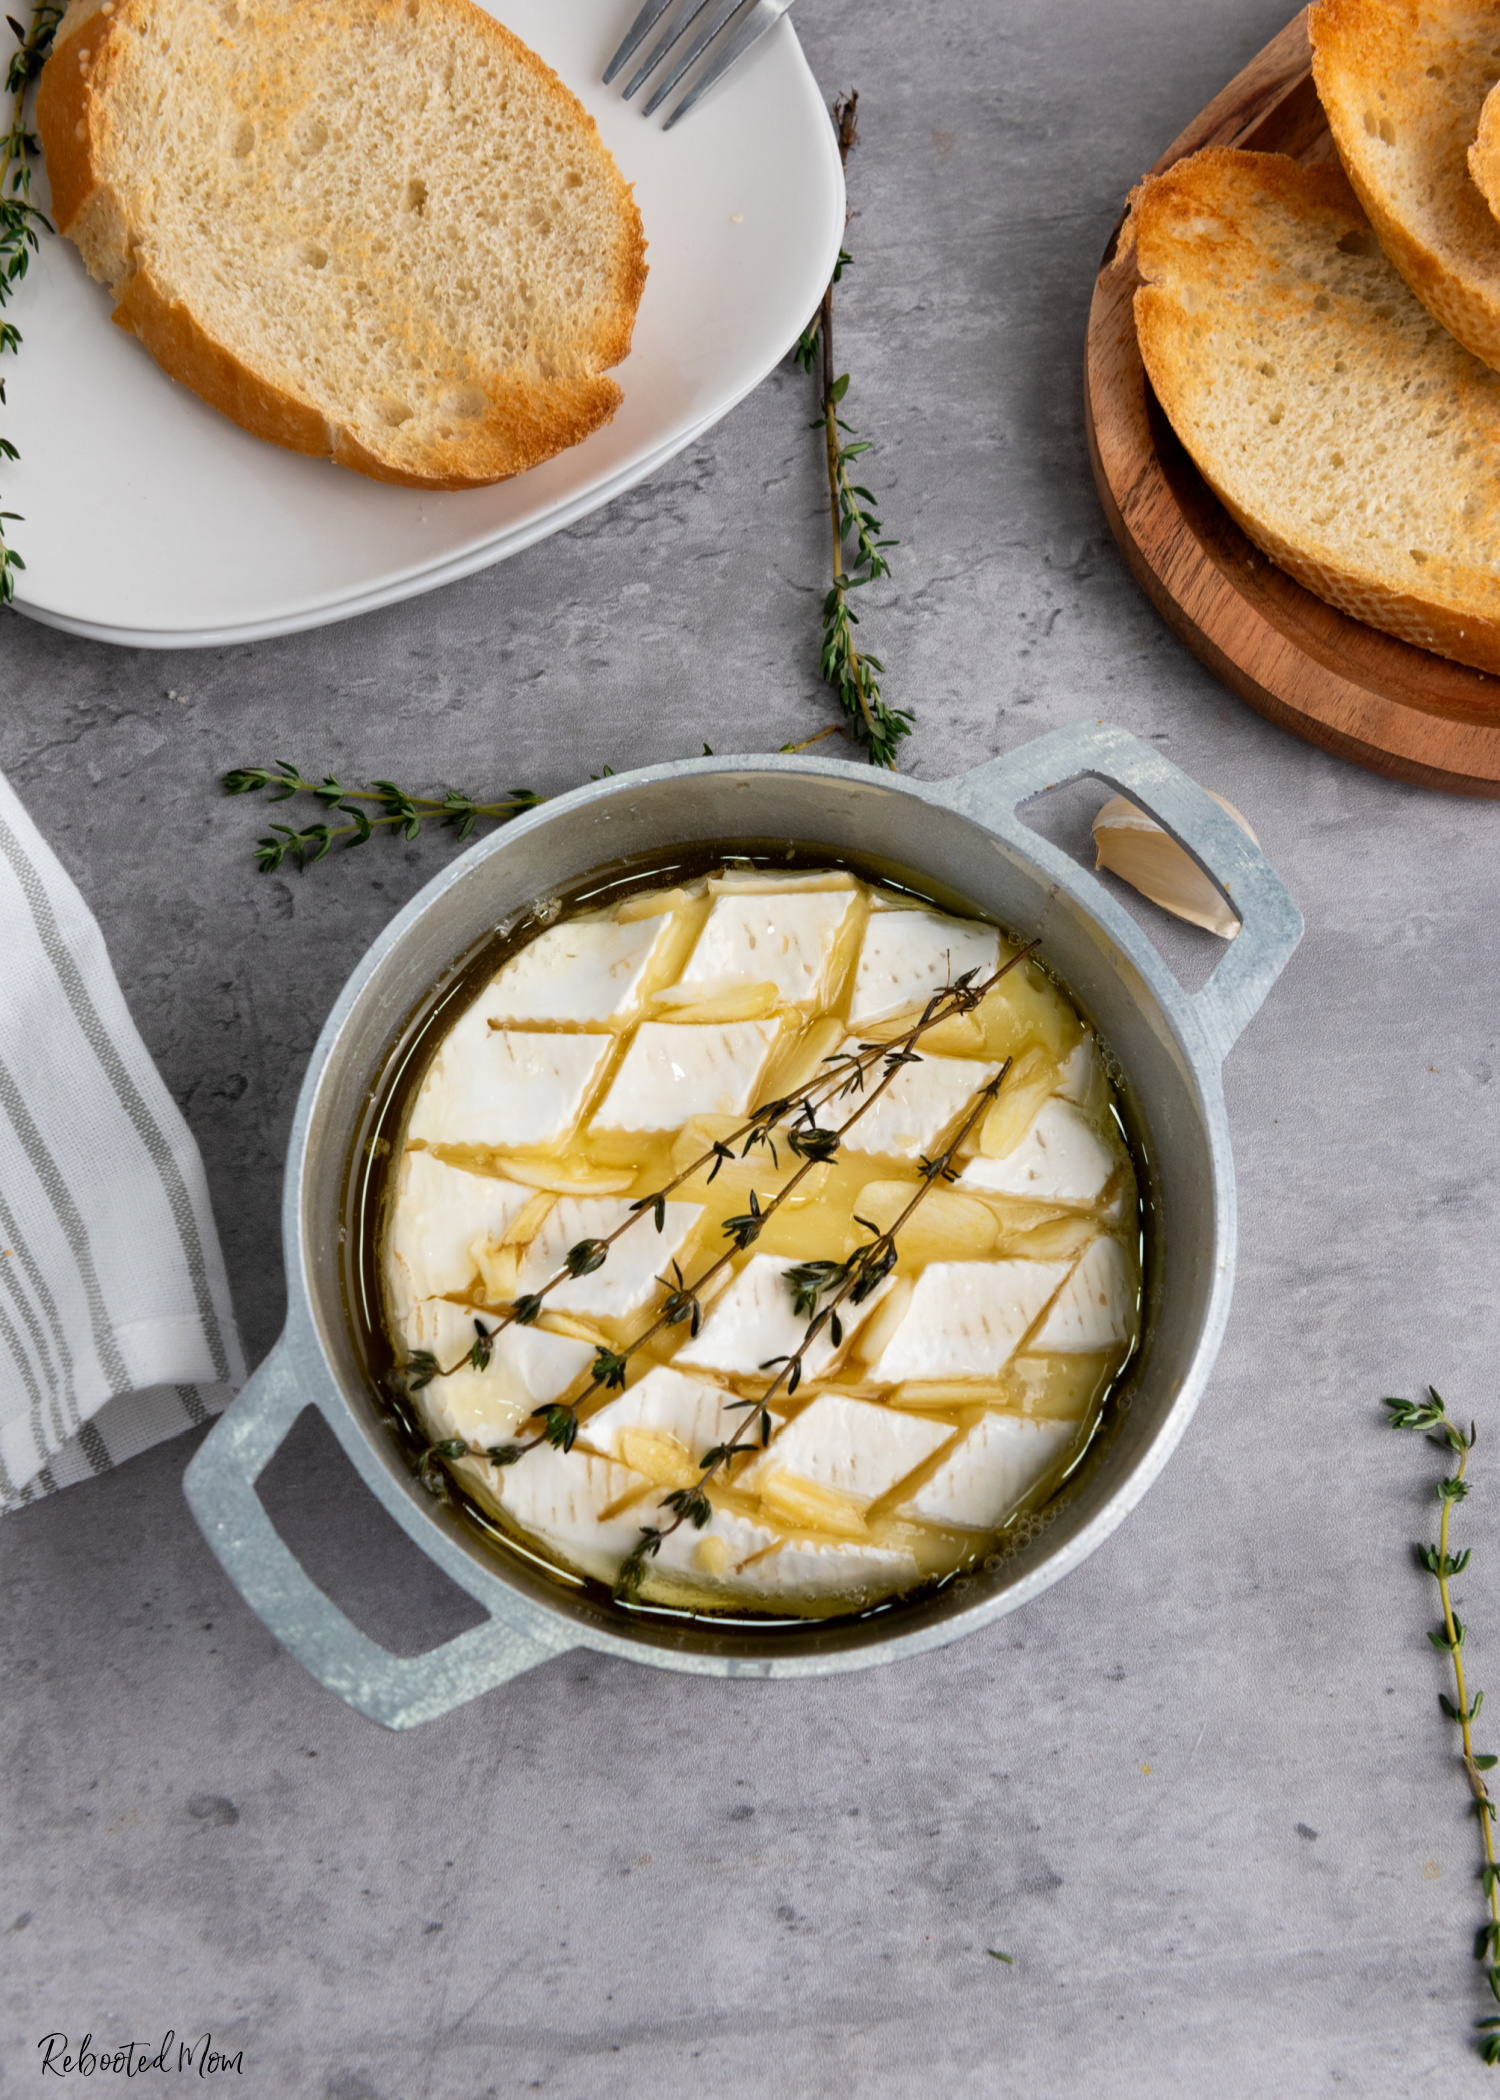 Baked Brie with Garlic and Honey - I can't think of a better way to chow down! Check out this recipe so you can whip up this delicious appetizer for yourself, family or friends!